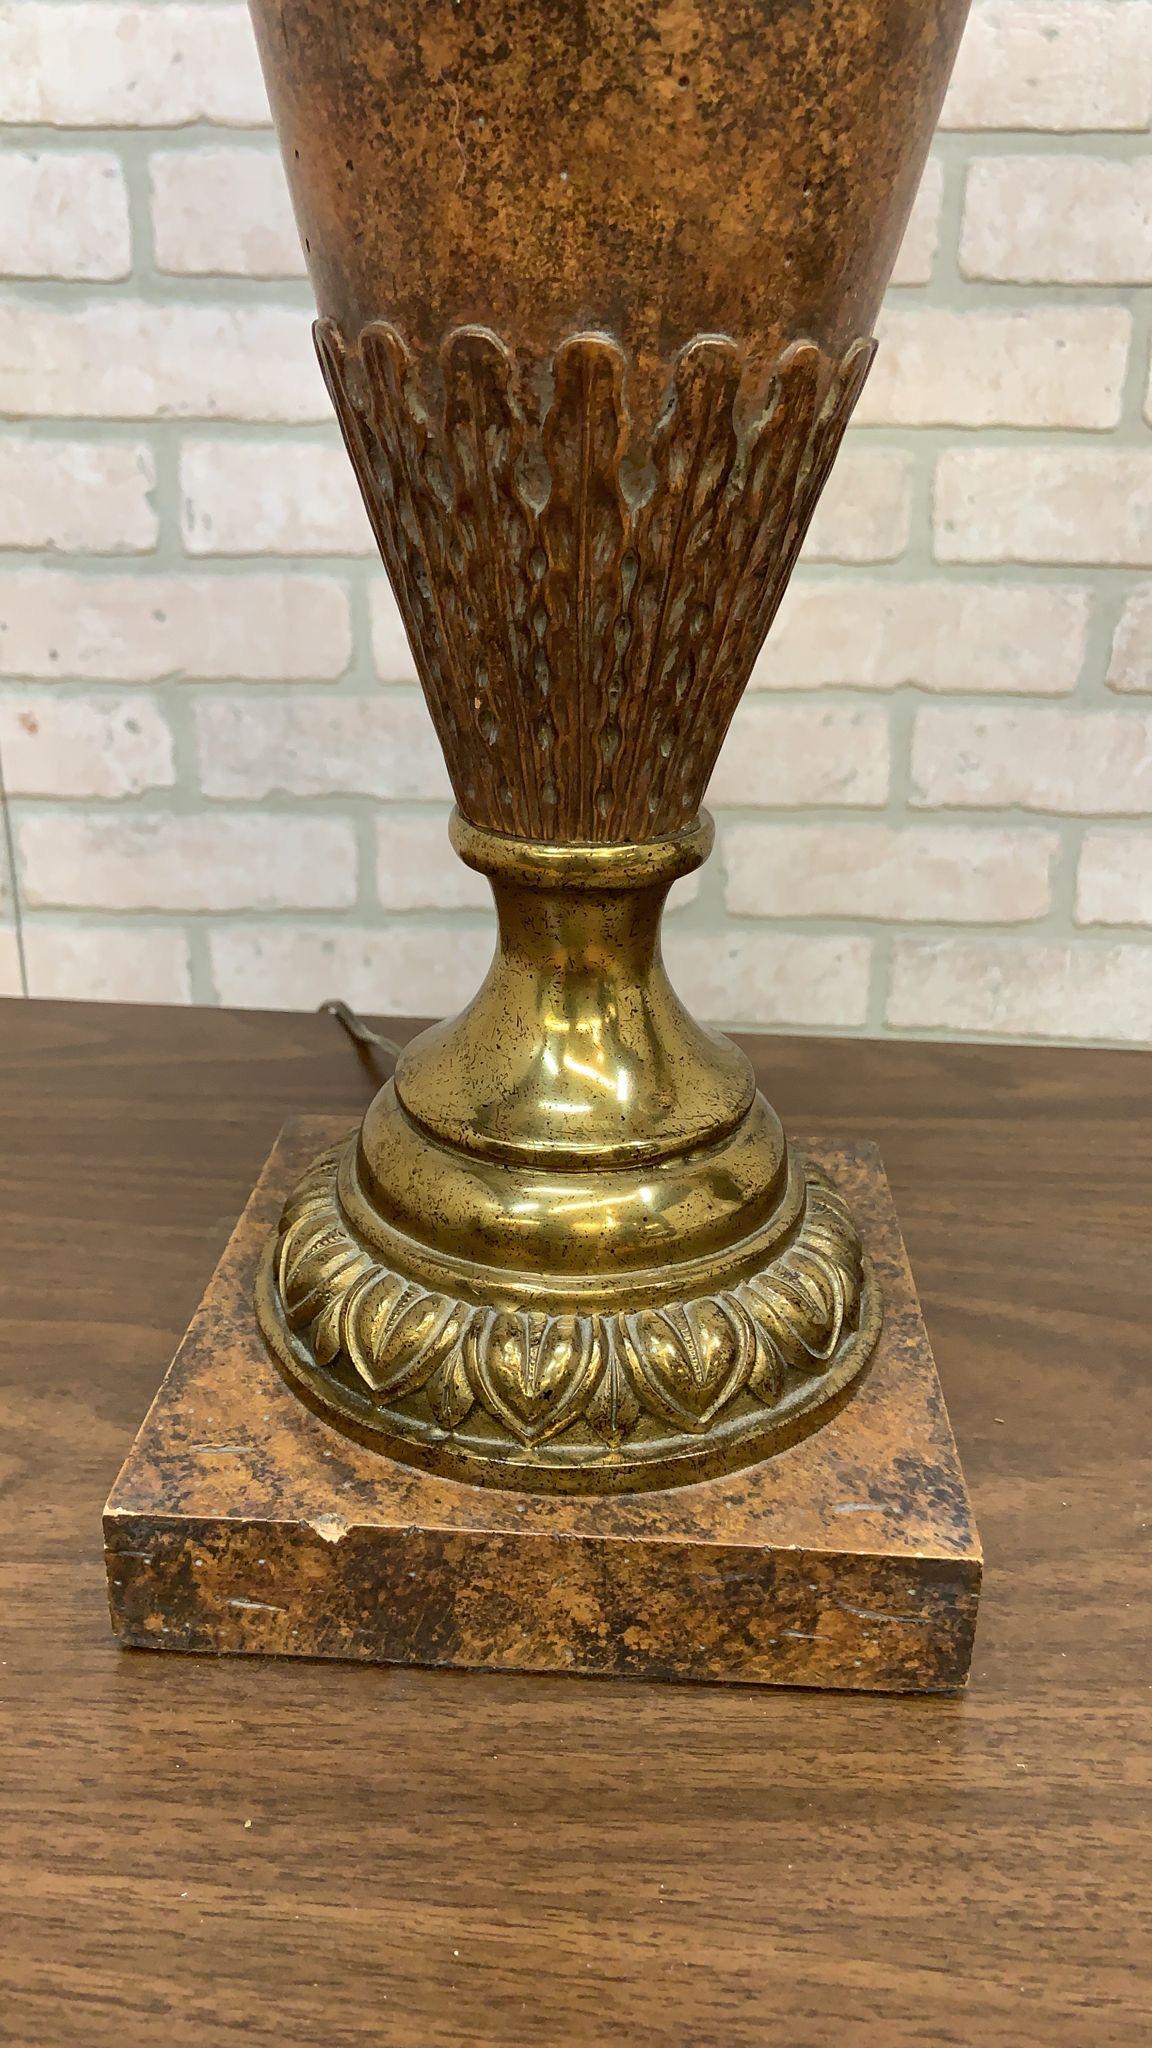 Vintage Maitland Smith French Neoclassical Bronze Urn Table Lamps - Pair

Stunning Pair of Vintage French Neoclassical Bronze Urn Table Lamps manufactured by Maitland-Smith. Each lamp is crafted with detailed tapered stems on bronze round foot and